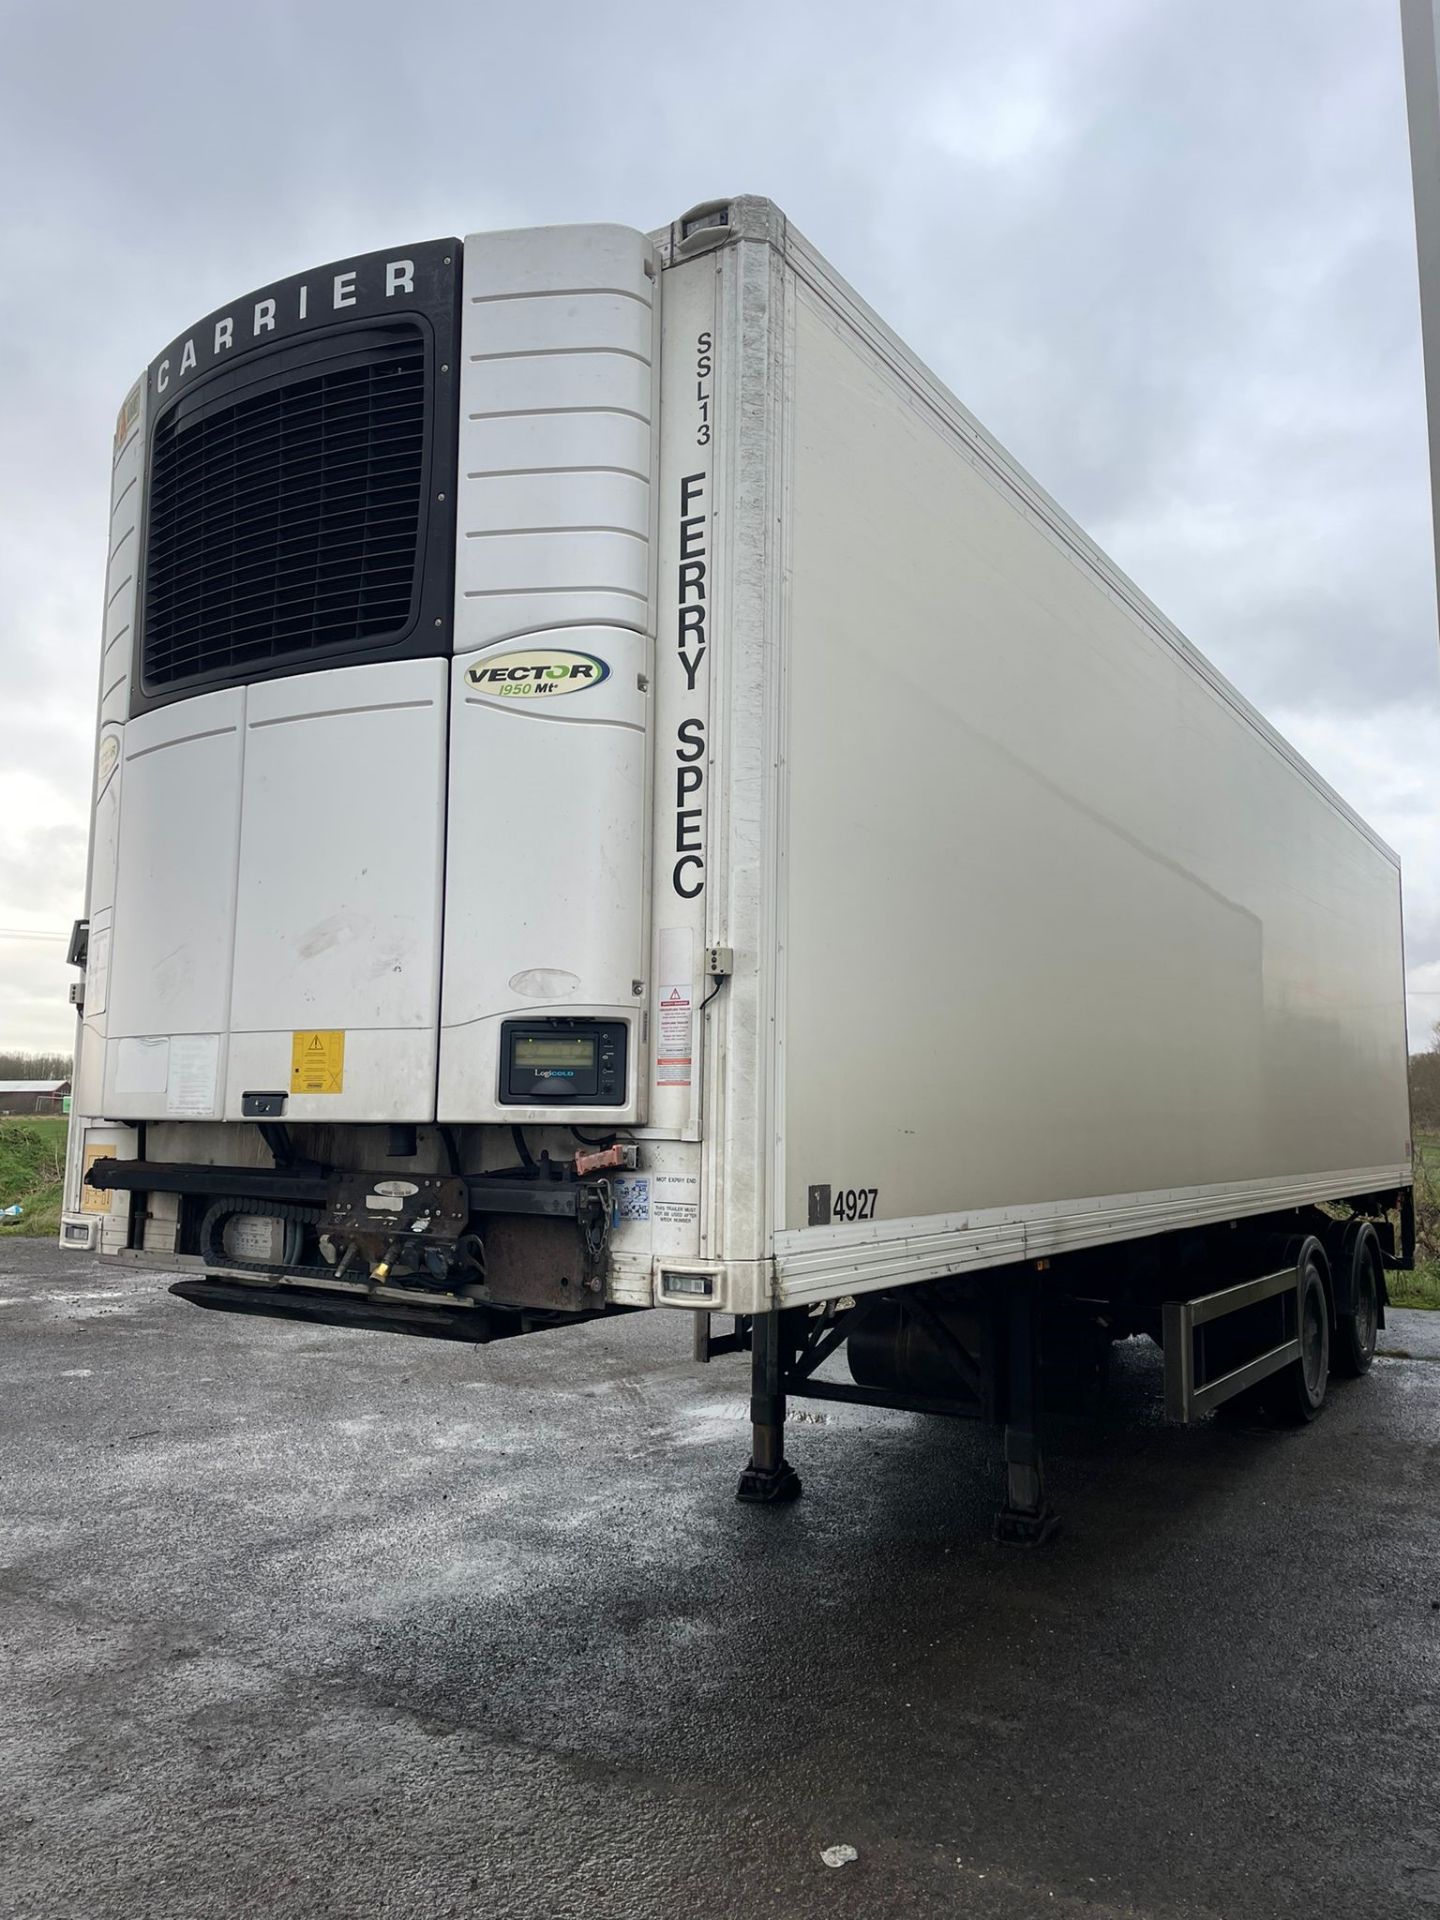 Trailer 4927 - 2013 G&A 10.4m Tandem Refrigerated Multi-Temp Trailer - Image 5 of 14